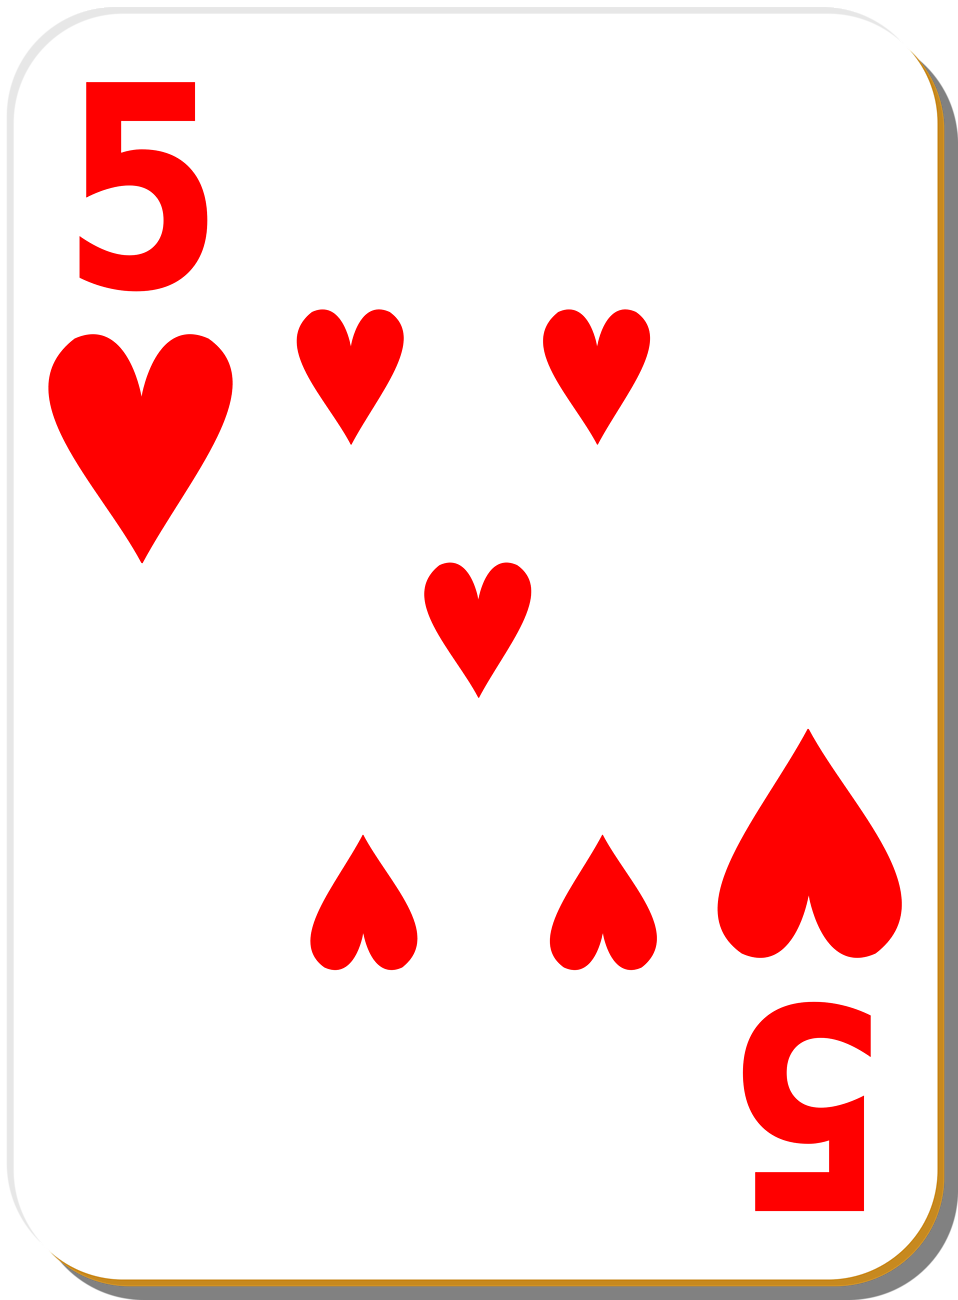 Illustration+of+a+Five+of+Hearts+playing+card.png